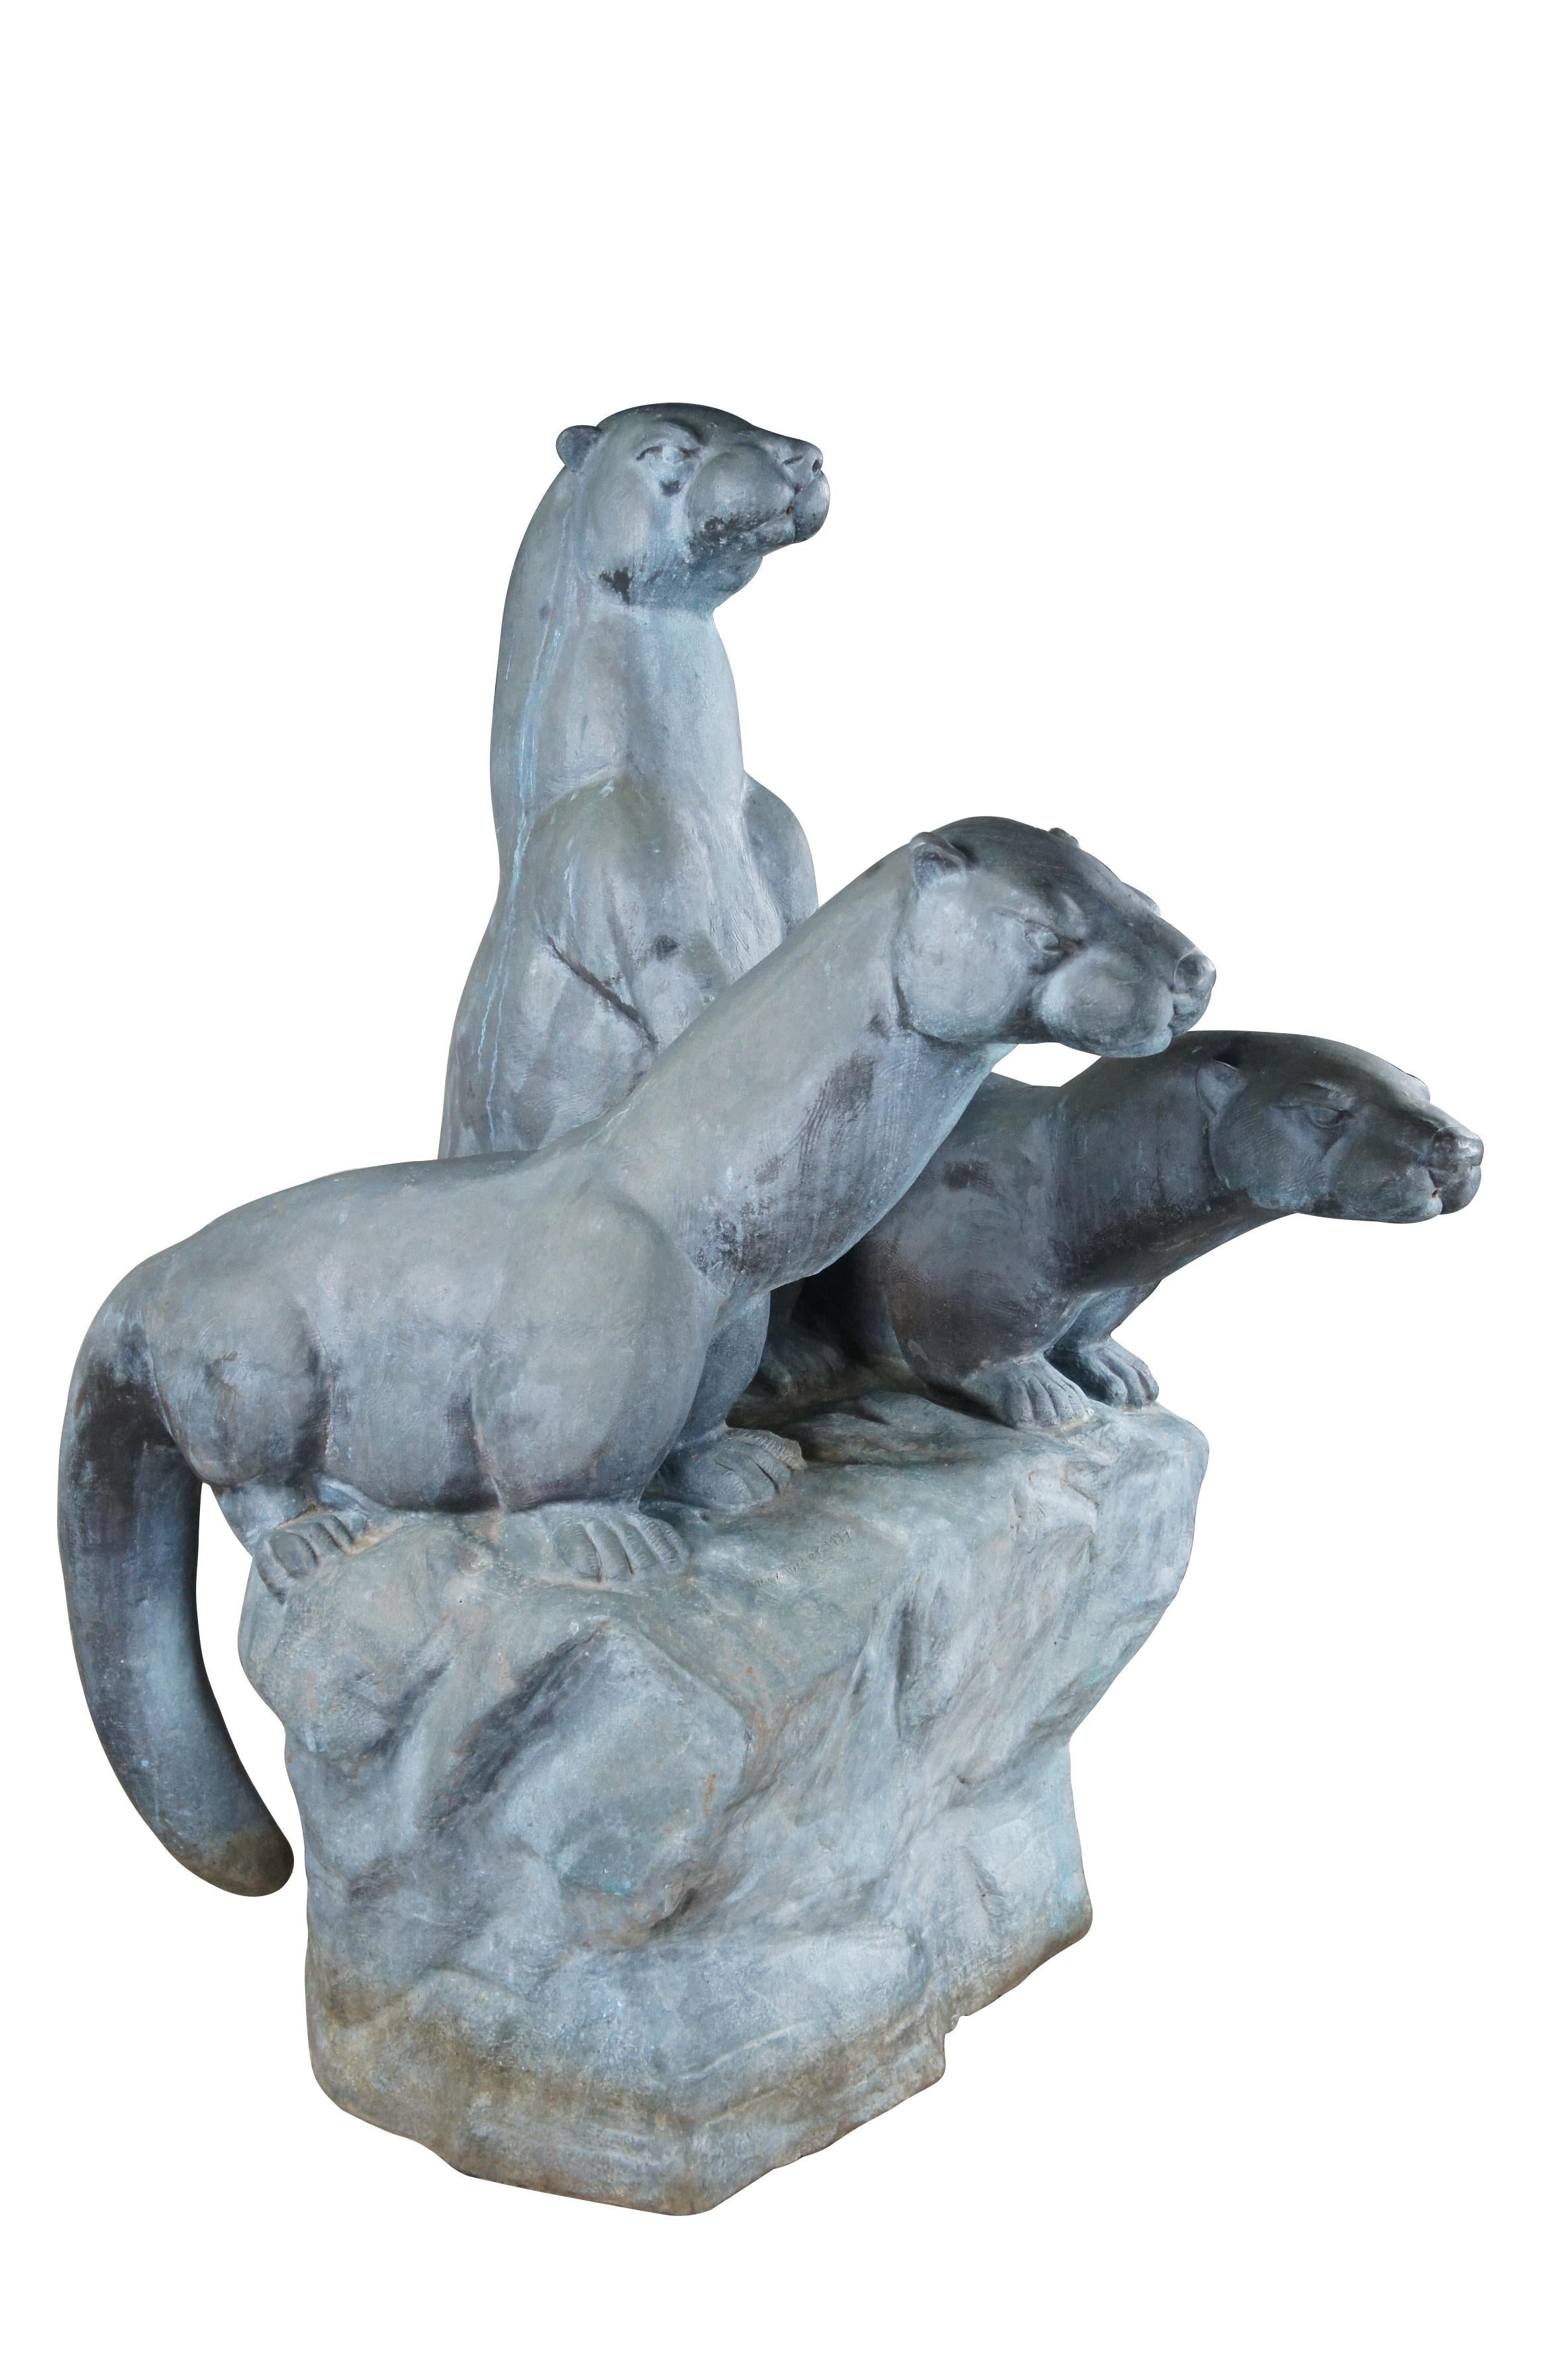 Monumental Max Turner Patinated Bronze Life Size Otter Fountain Statue Sculpture In Good Condition For Sale In Dayton, OH